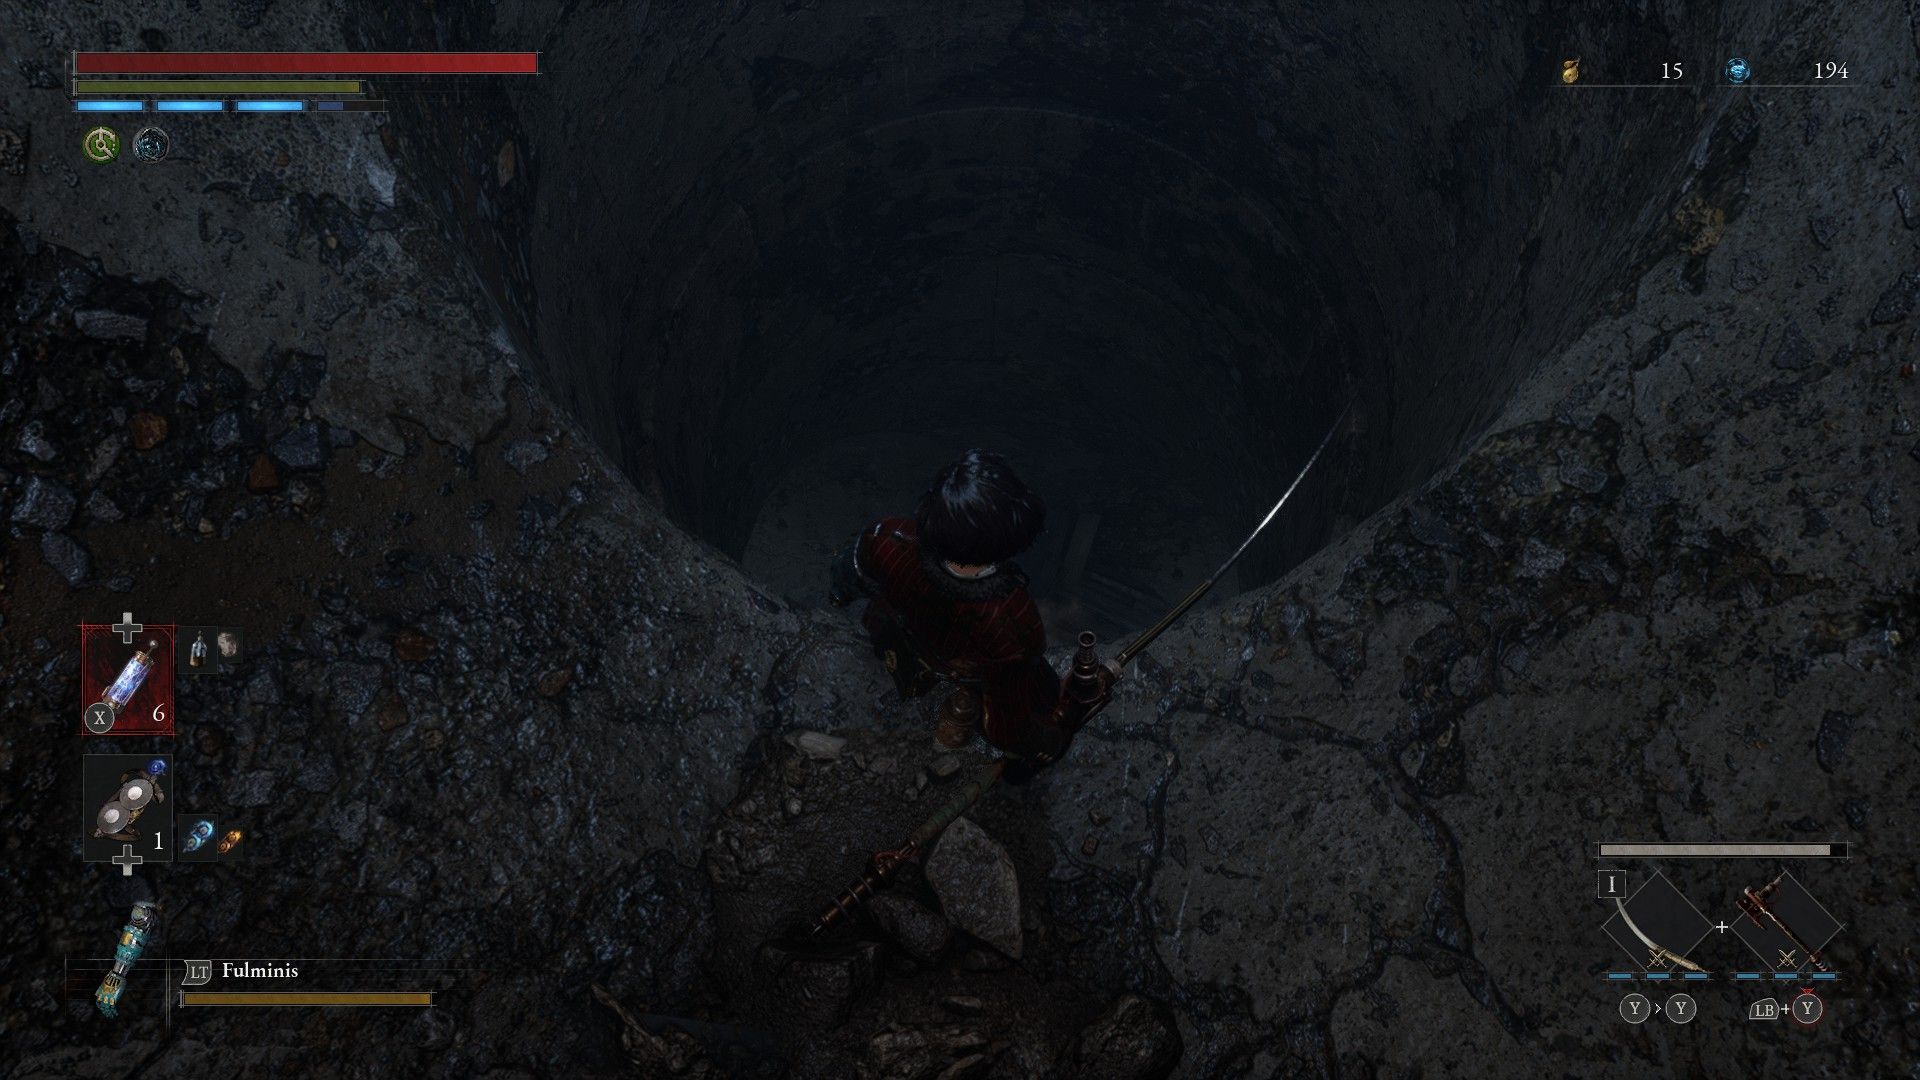 P finds entrance to a secret path below Rosa Isabelle Culvert in Lies of P